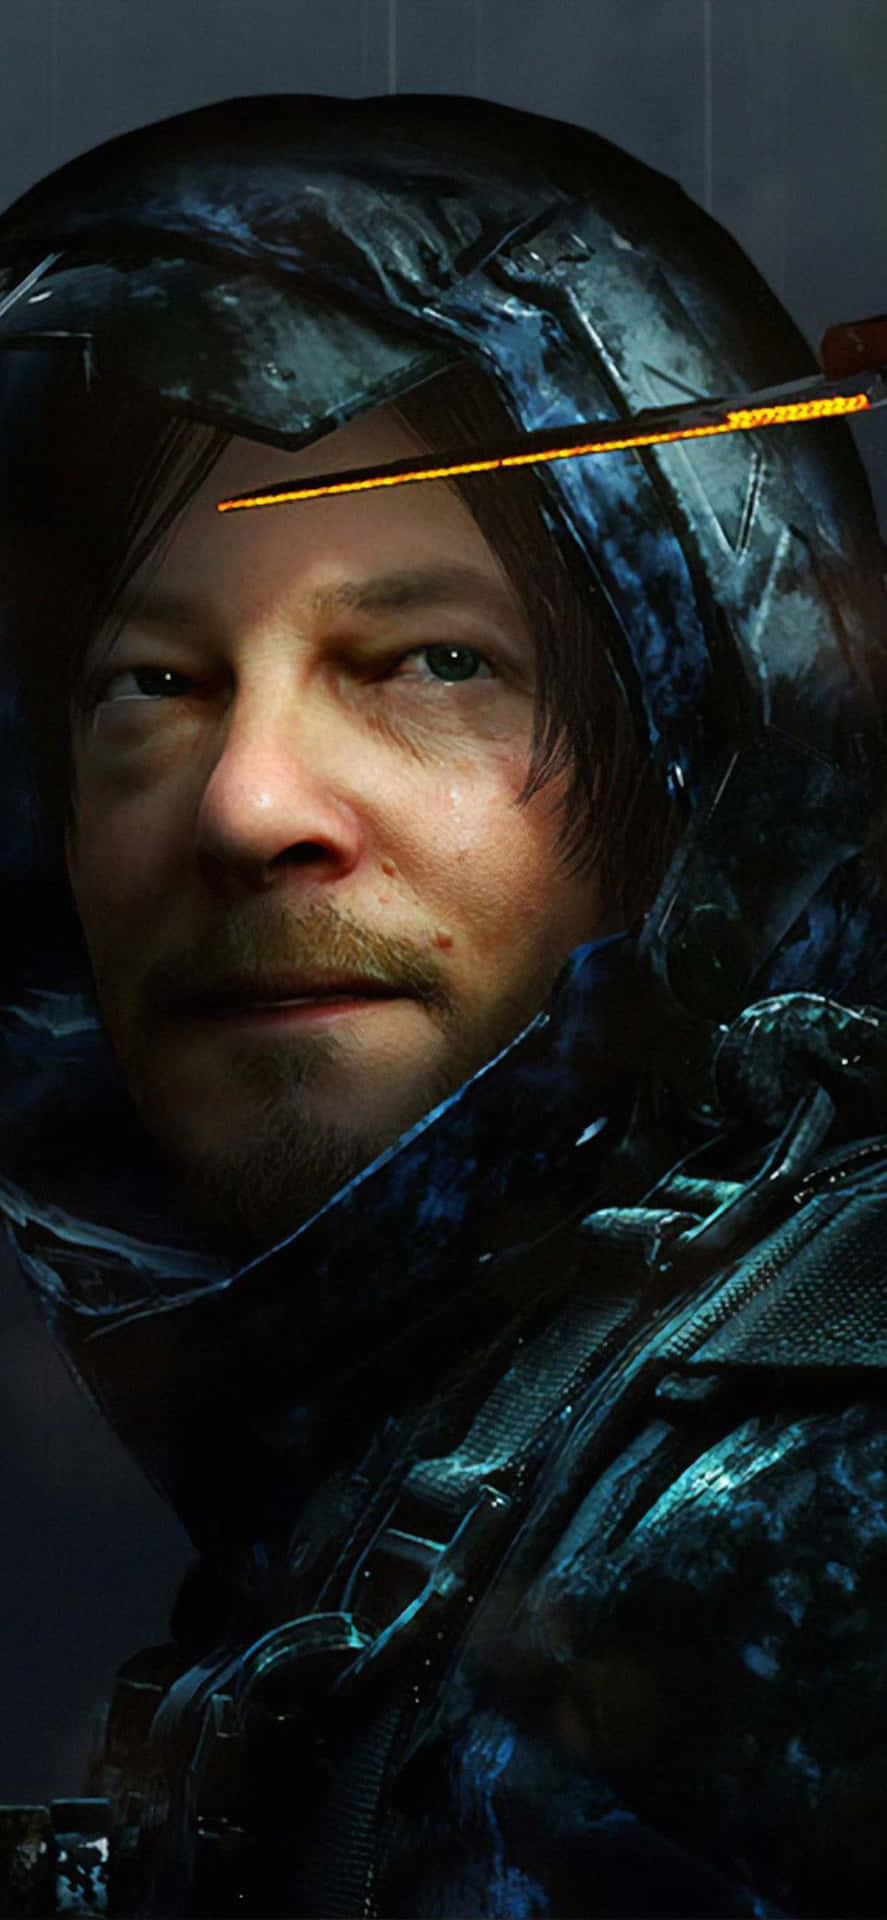 Get the chance to explore the captivating world of Death Stranding with the Iphone Xs Max